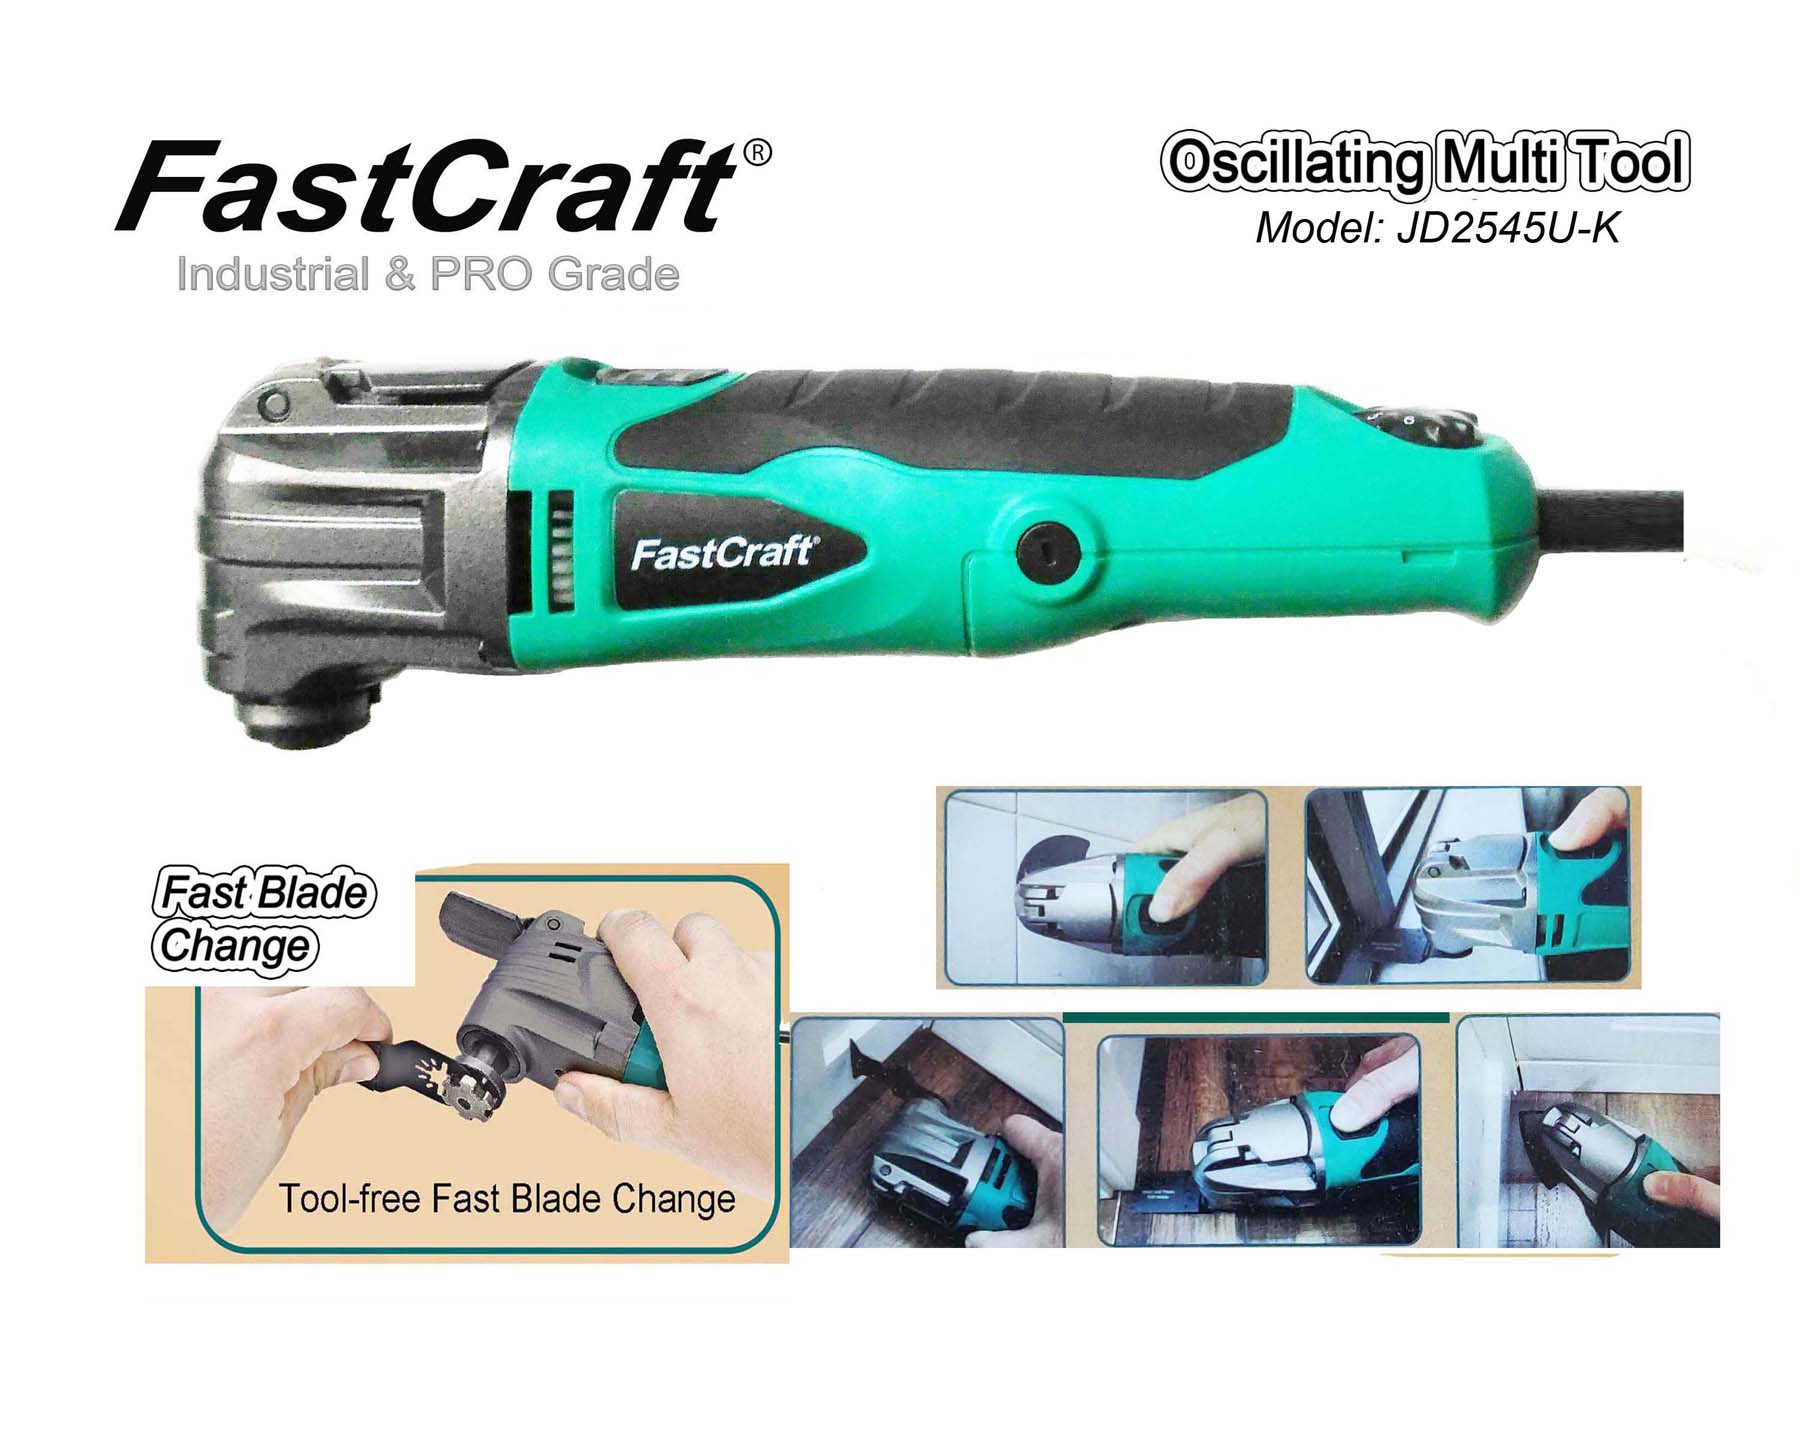 NYCL FastCraft Oscillating Multi Tool - Tool-less Fast Blade Release/Lock